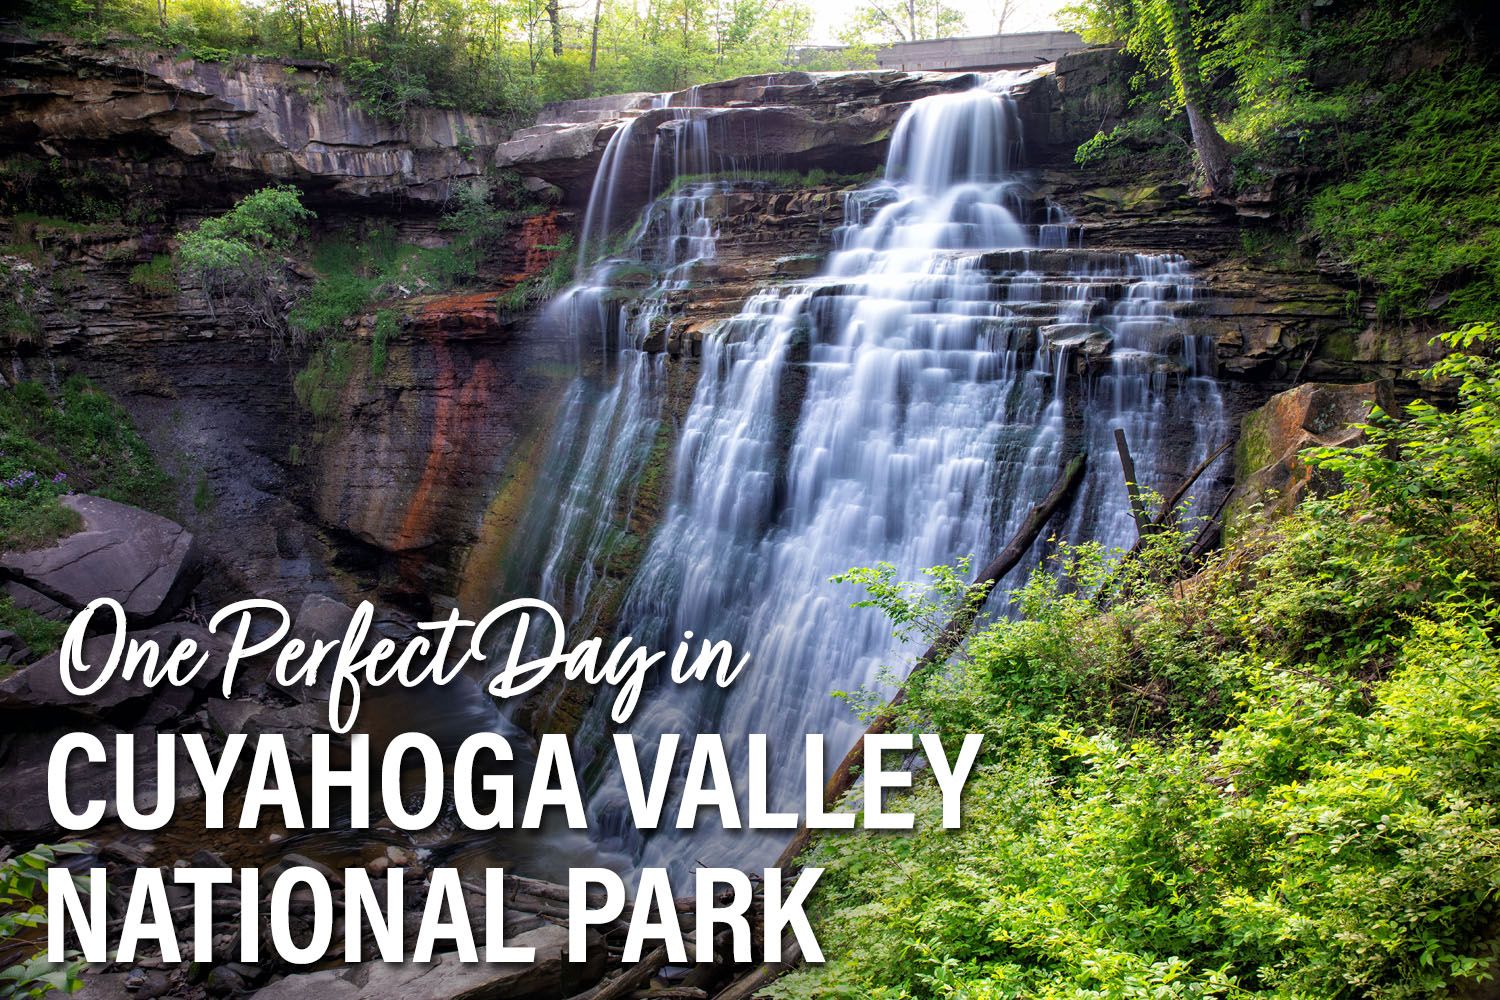 One Day Cuyahoga Valley